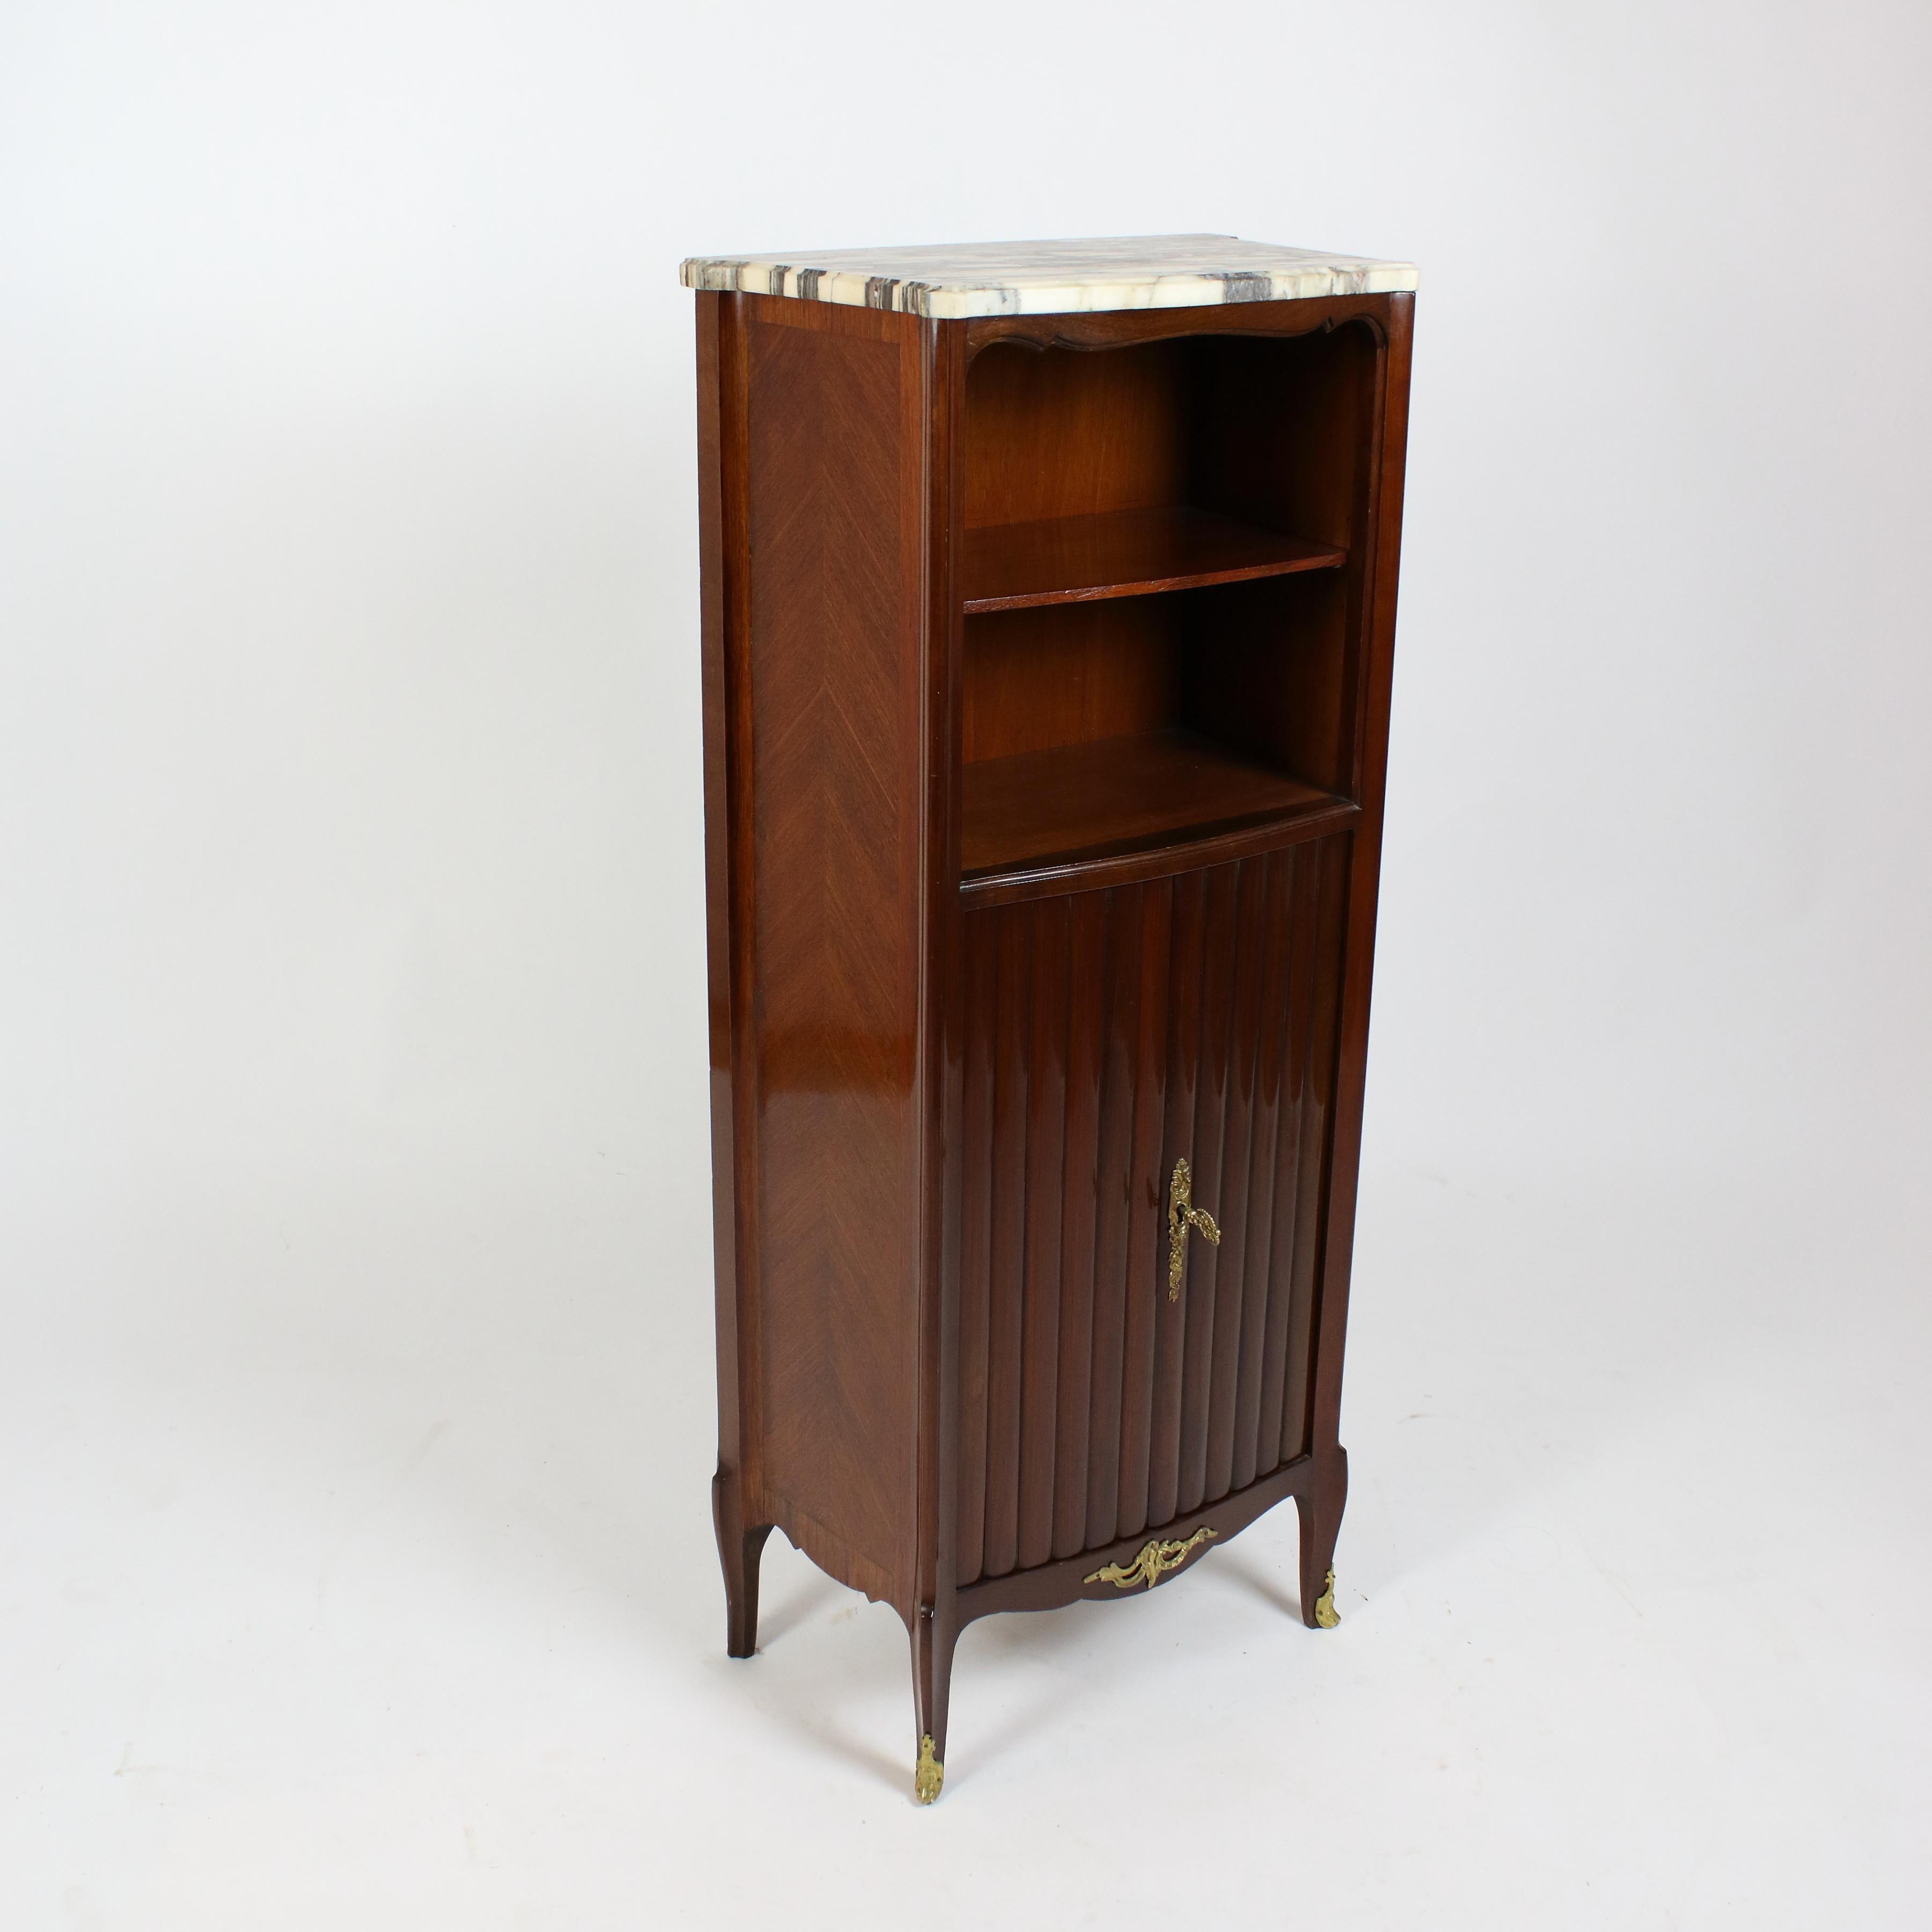 Late 19th Century French Louis XV Transition Tall Boy or Shelf For Sale 2